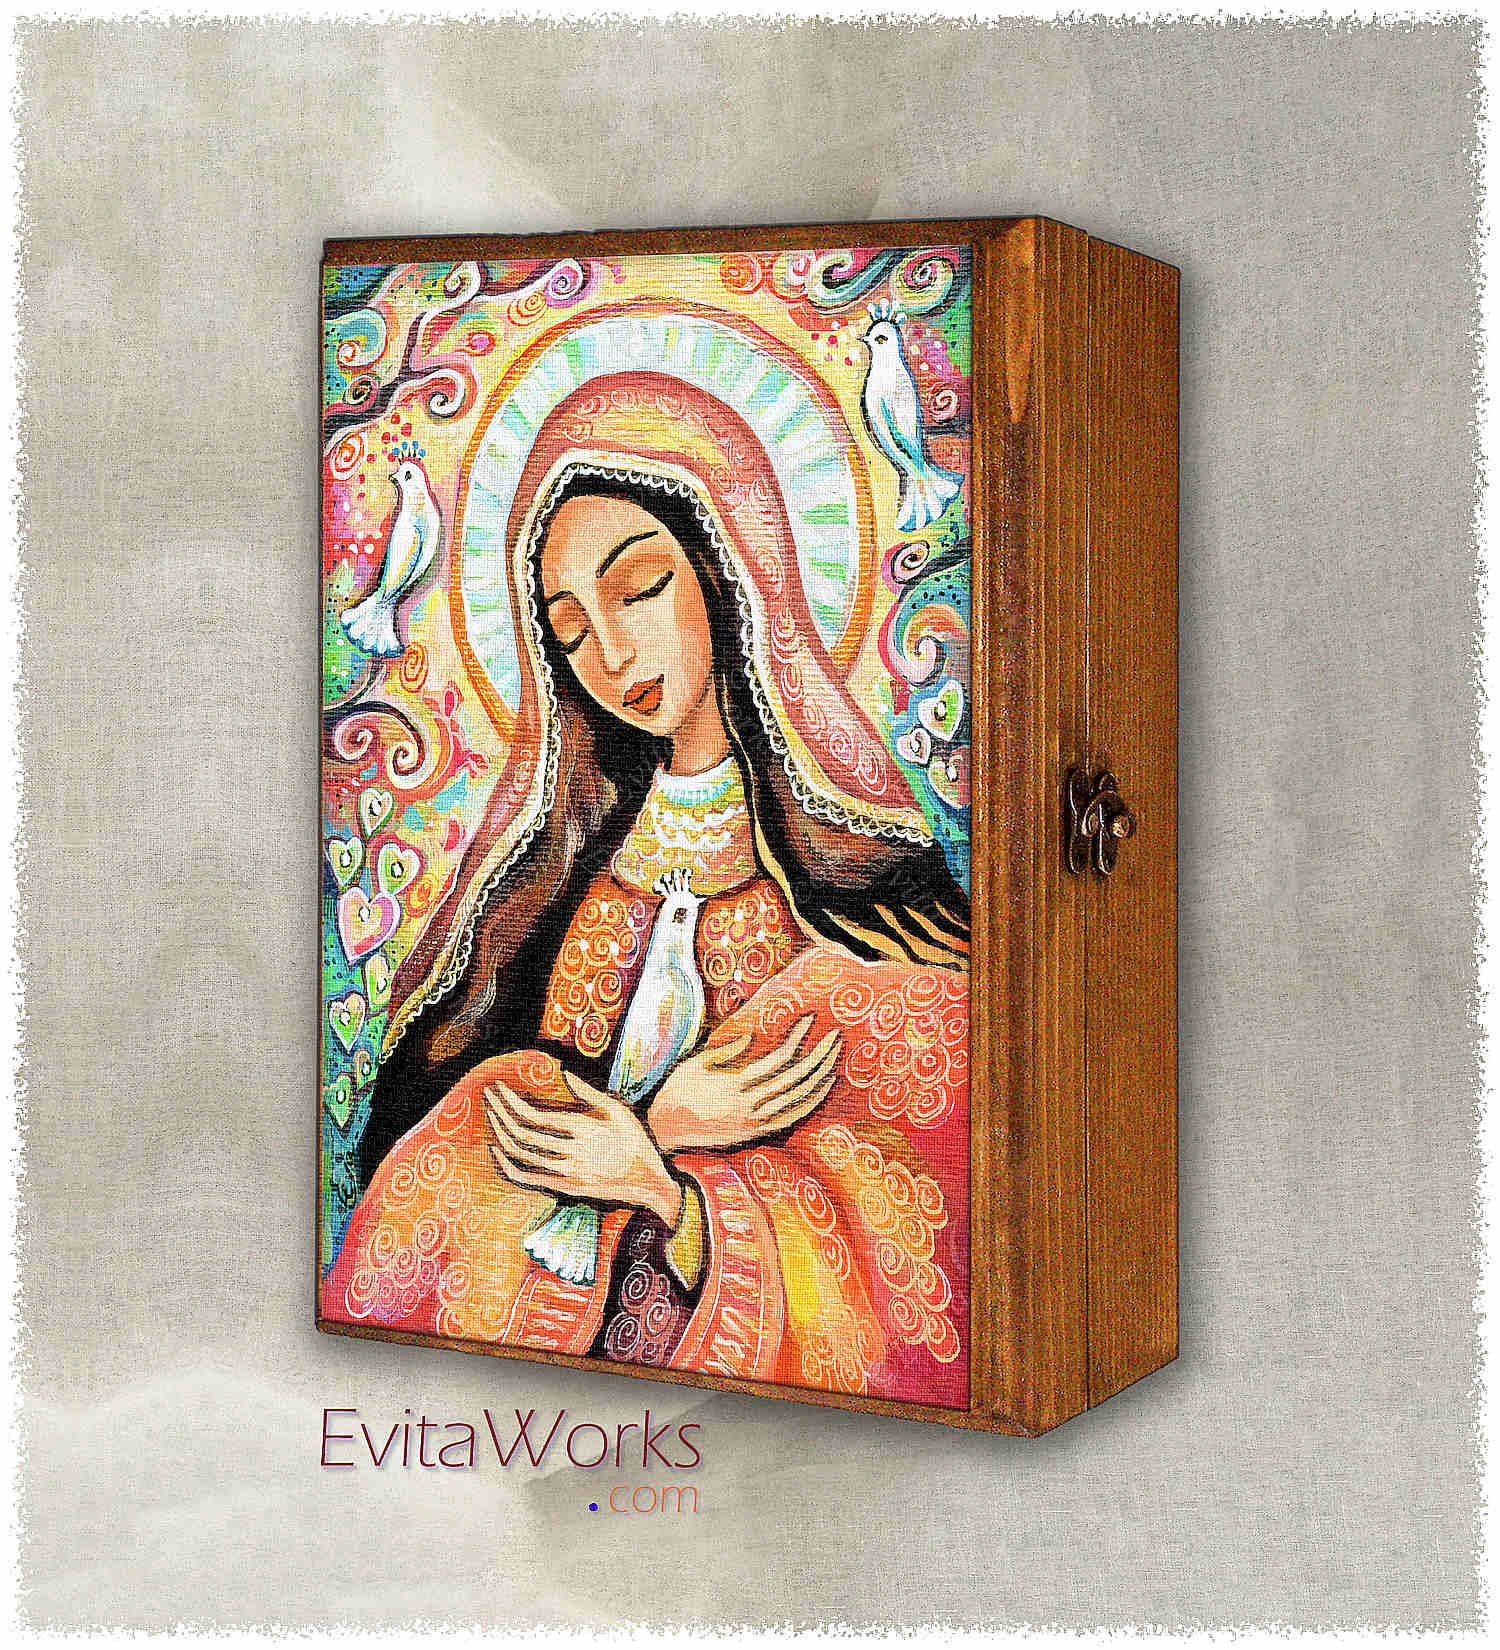 Hit to learn about "The Prayer of Mary, holy woman" on jewelboxes